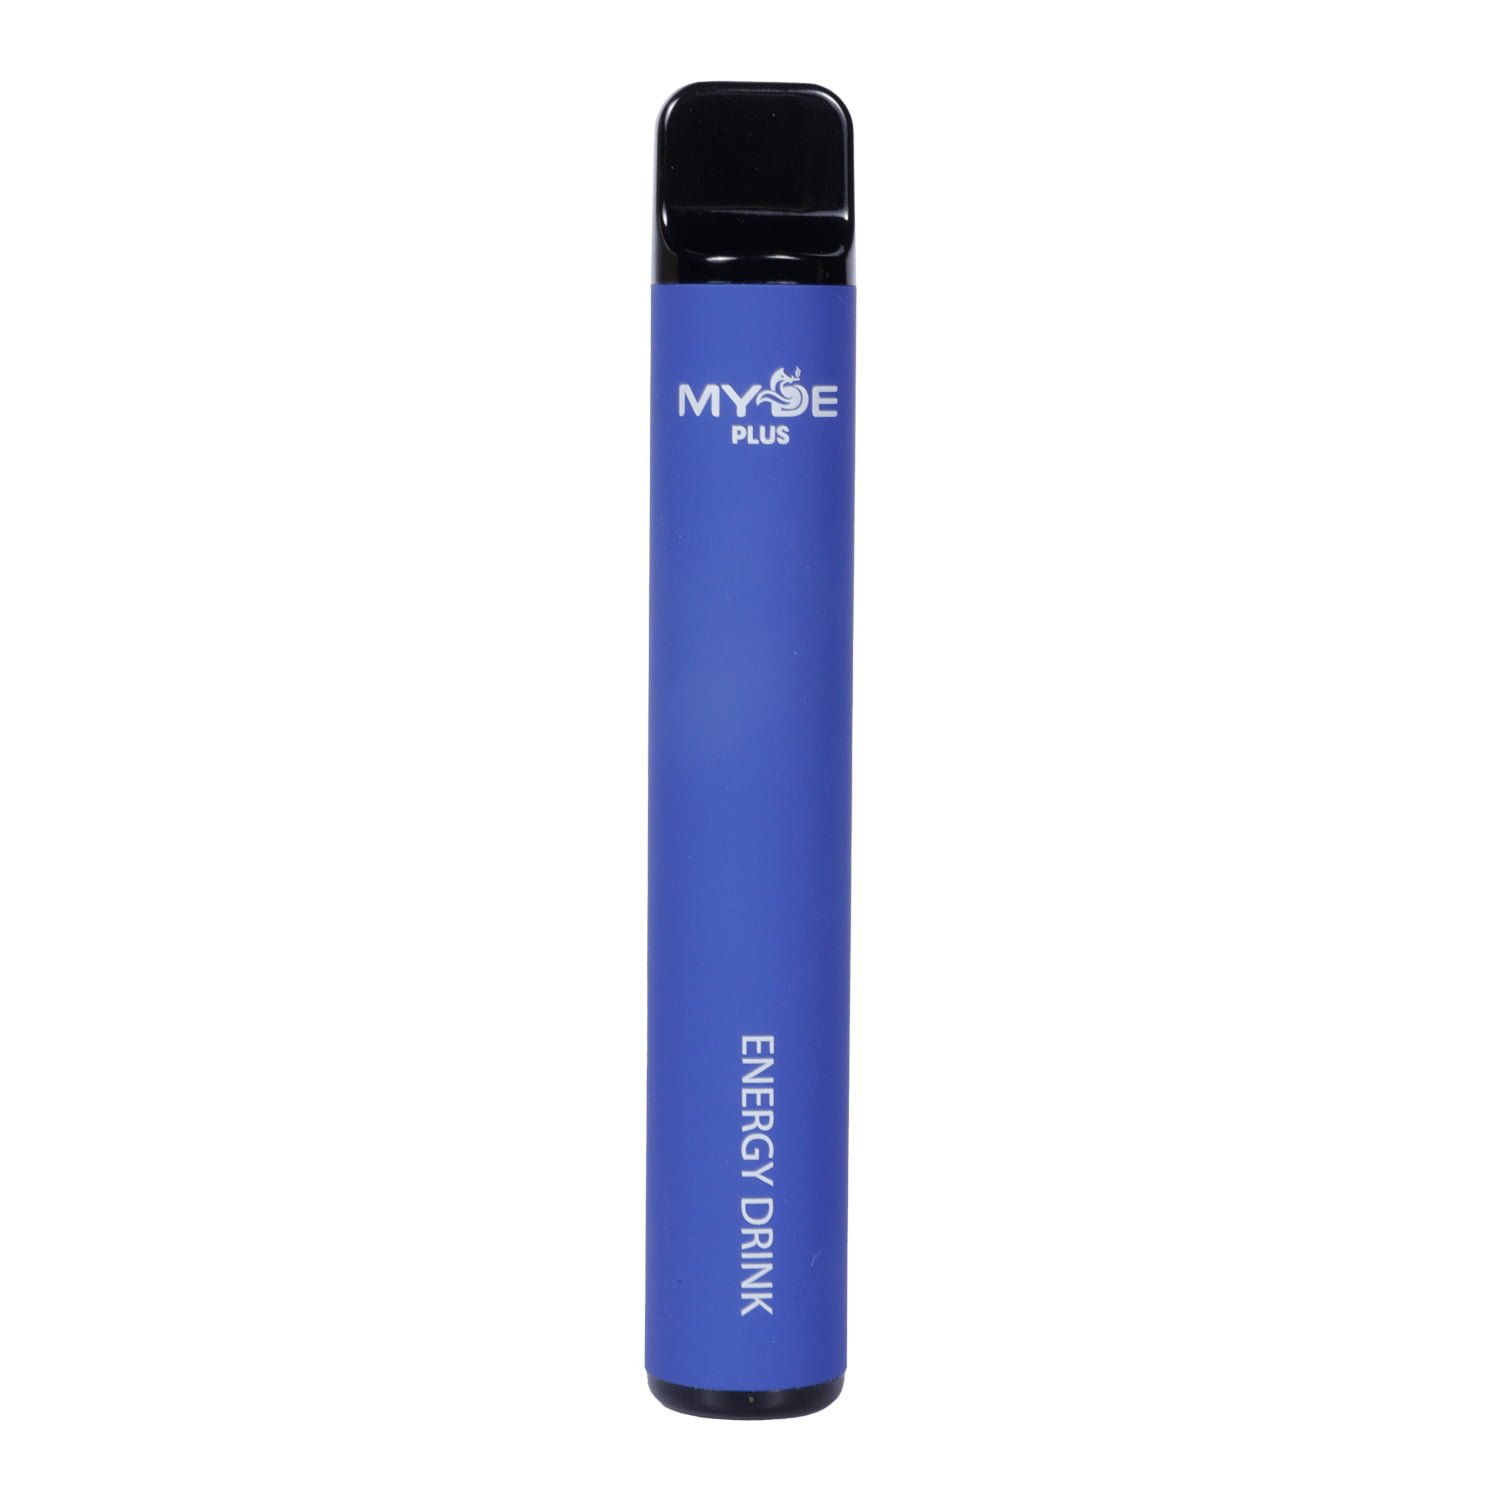 Stylo Jetable 800 Puffs